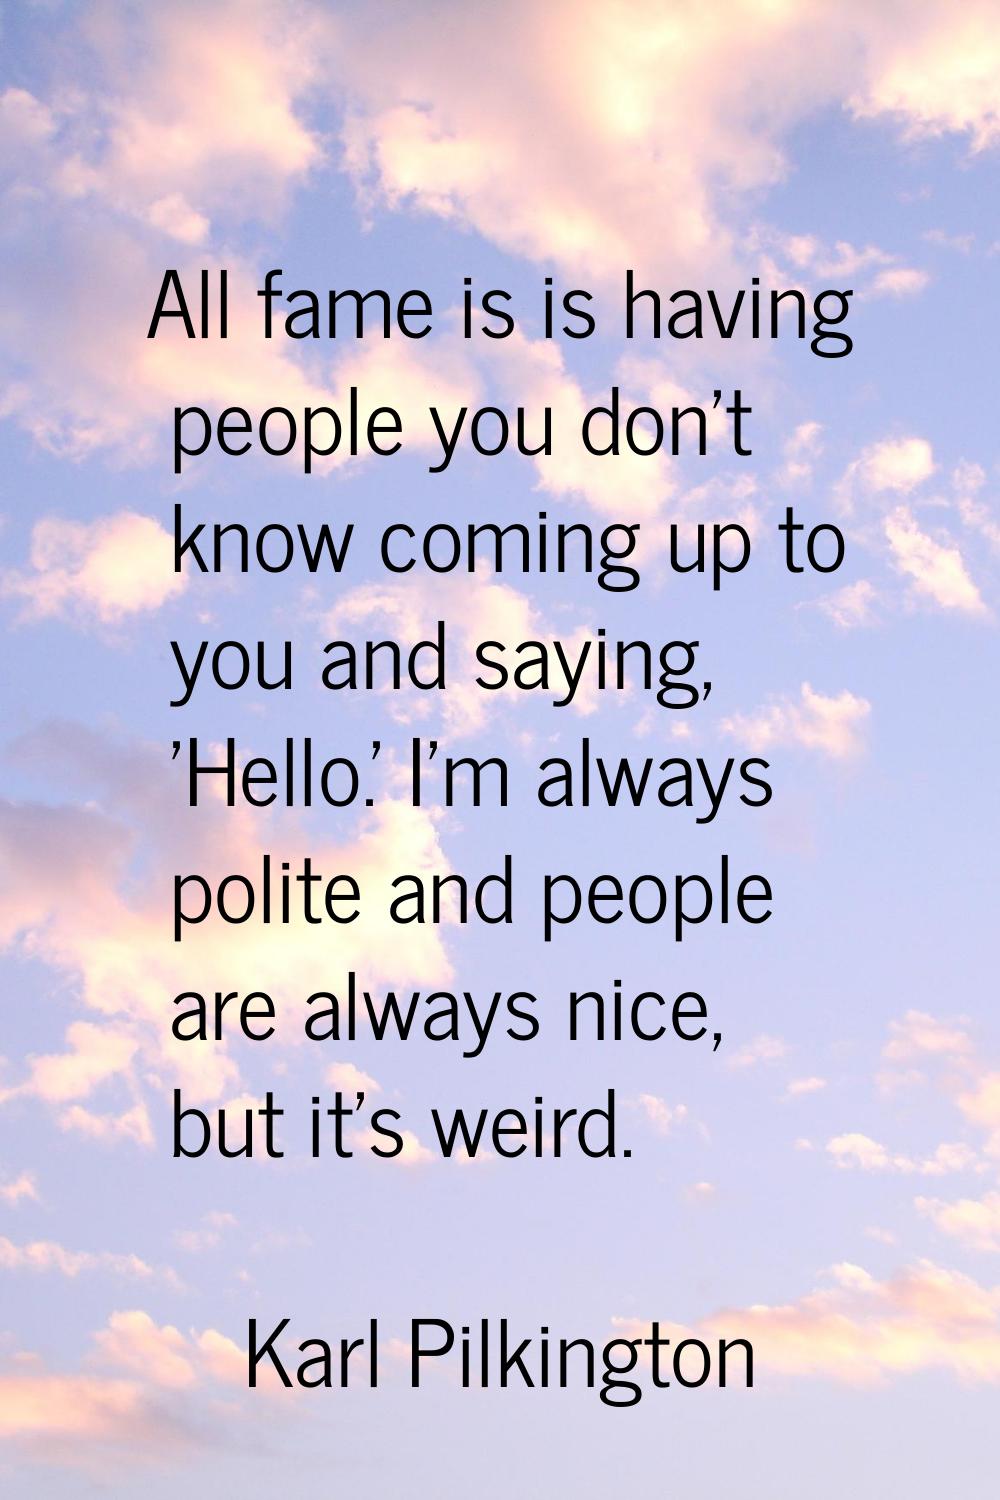 All fame is is having people you don't know coming up to you and saying, 'Hello.' I'm always polite